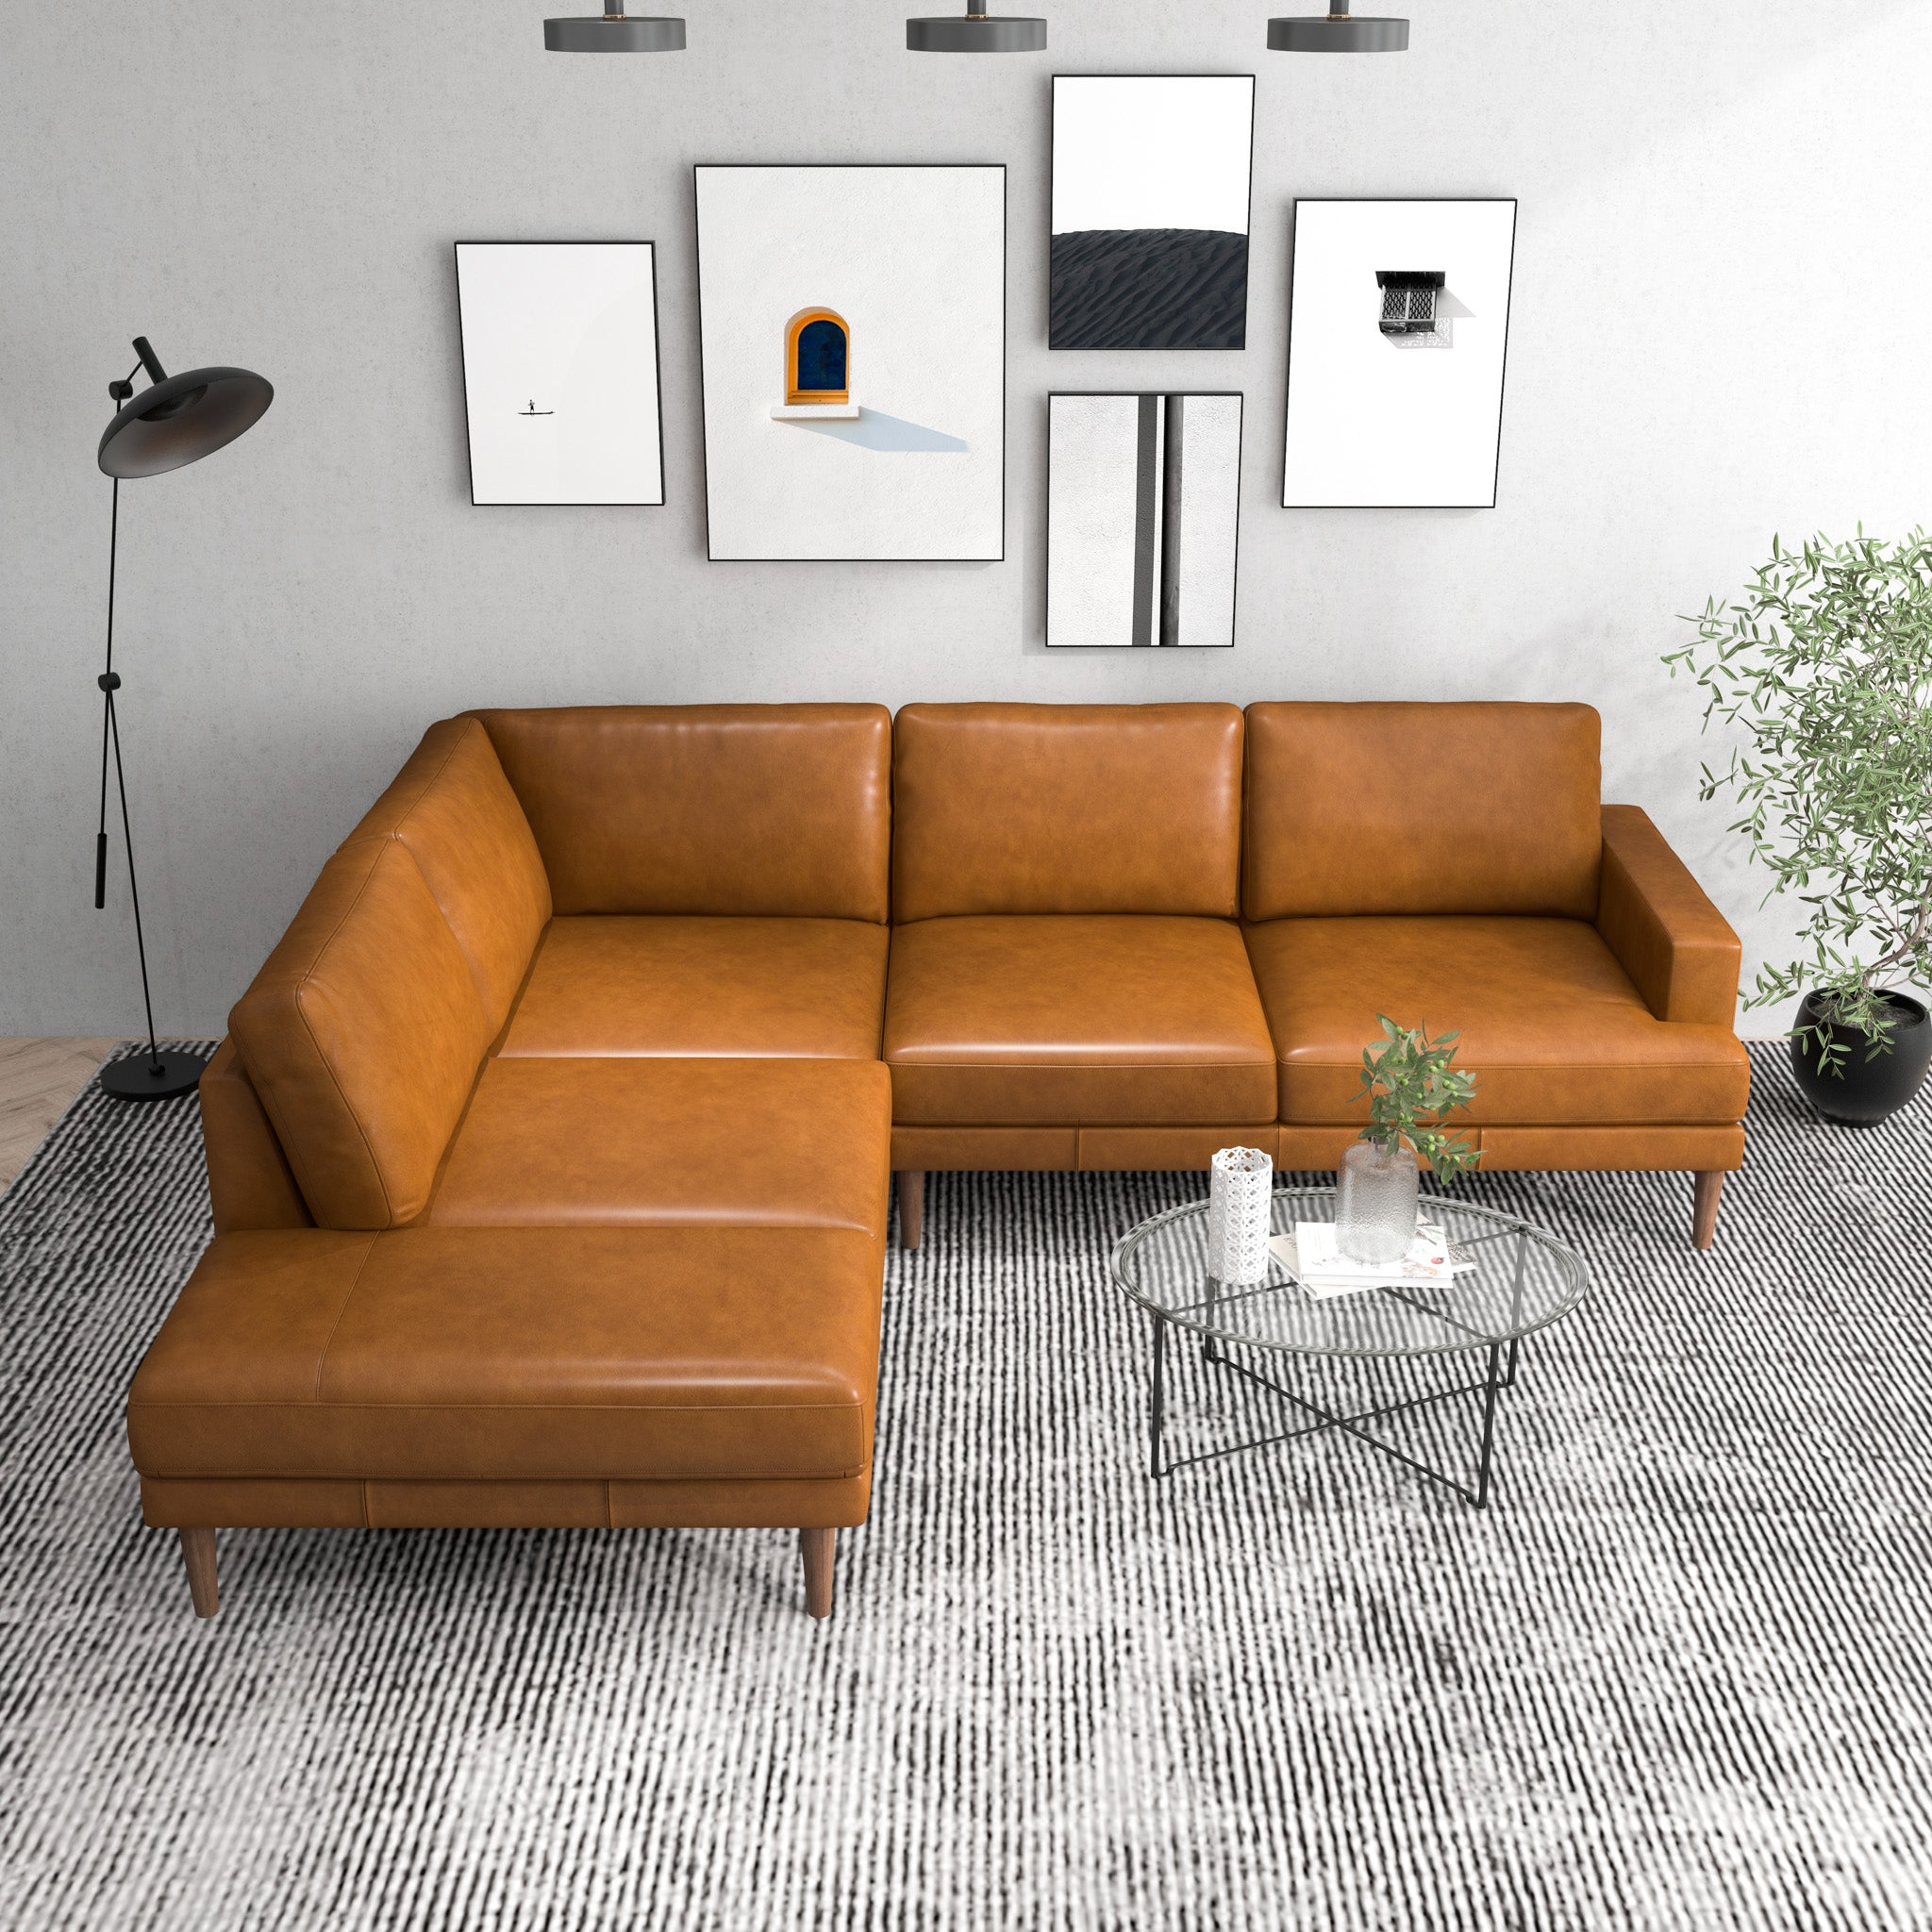 Harmony Tan Leather Sectional Sofa Left Facing Chaise